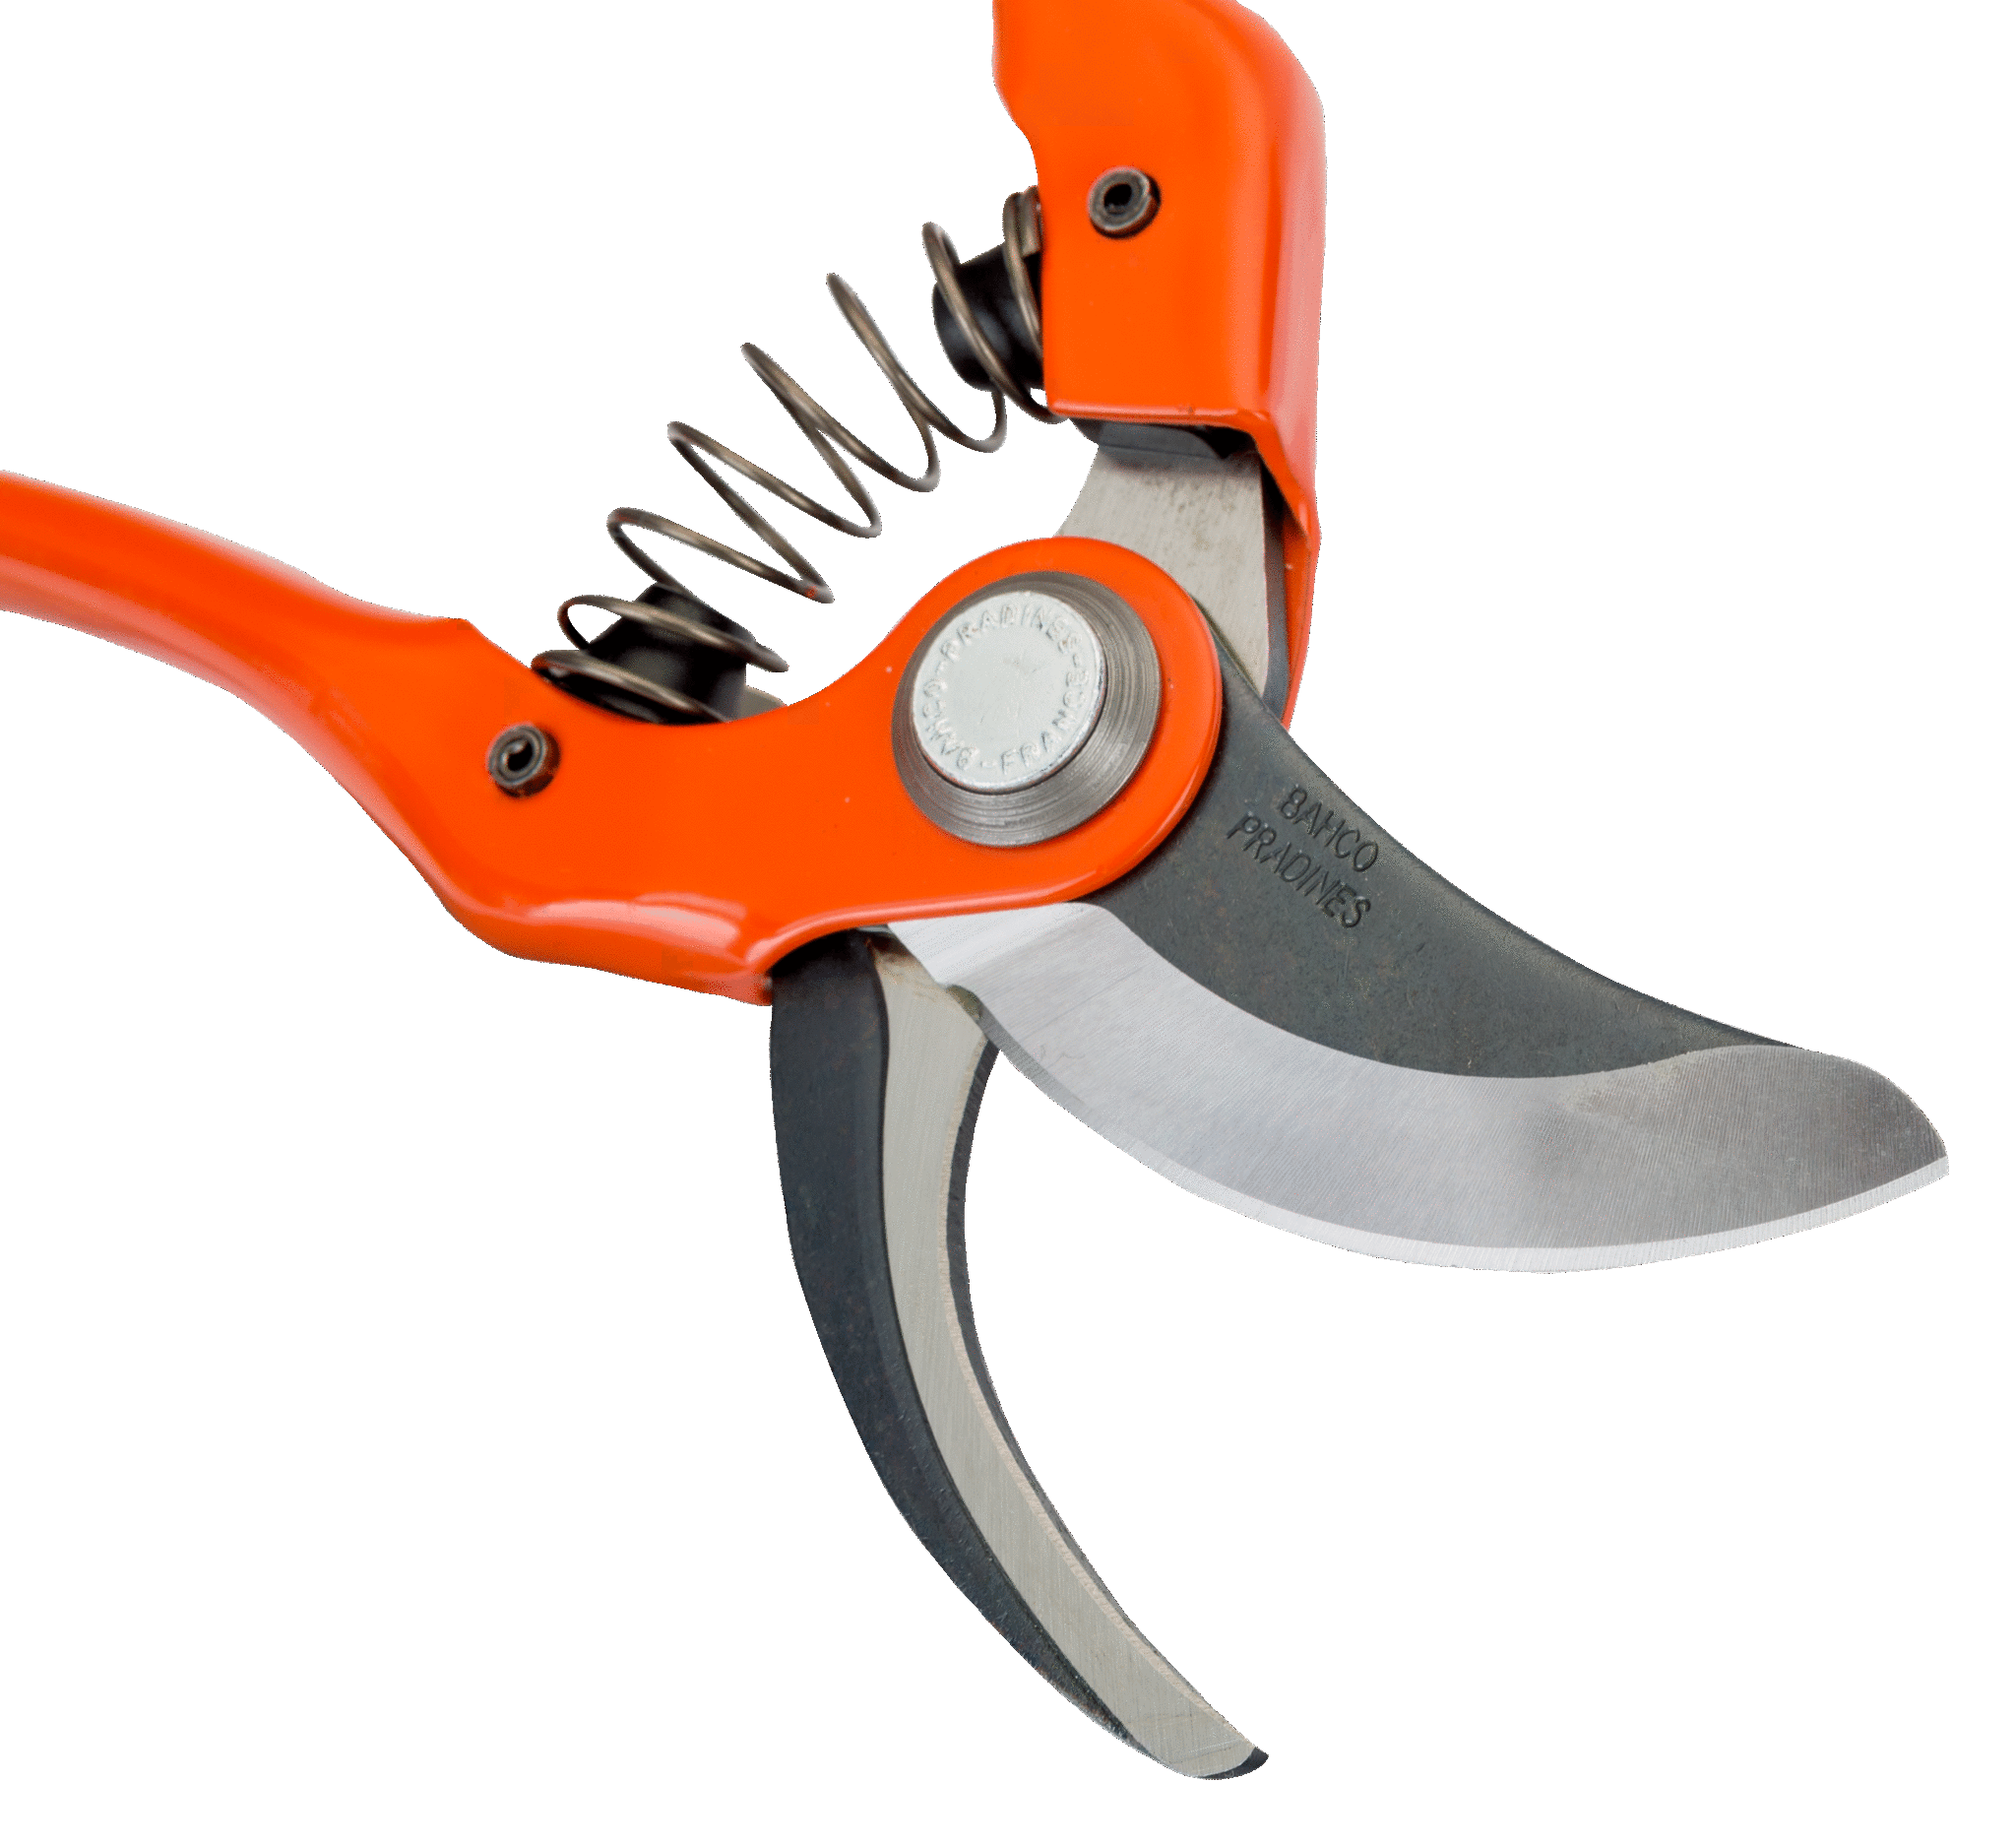 Bypass Secateurs with Stamped/Pressed Steel Handle and Angled Cutting Head